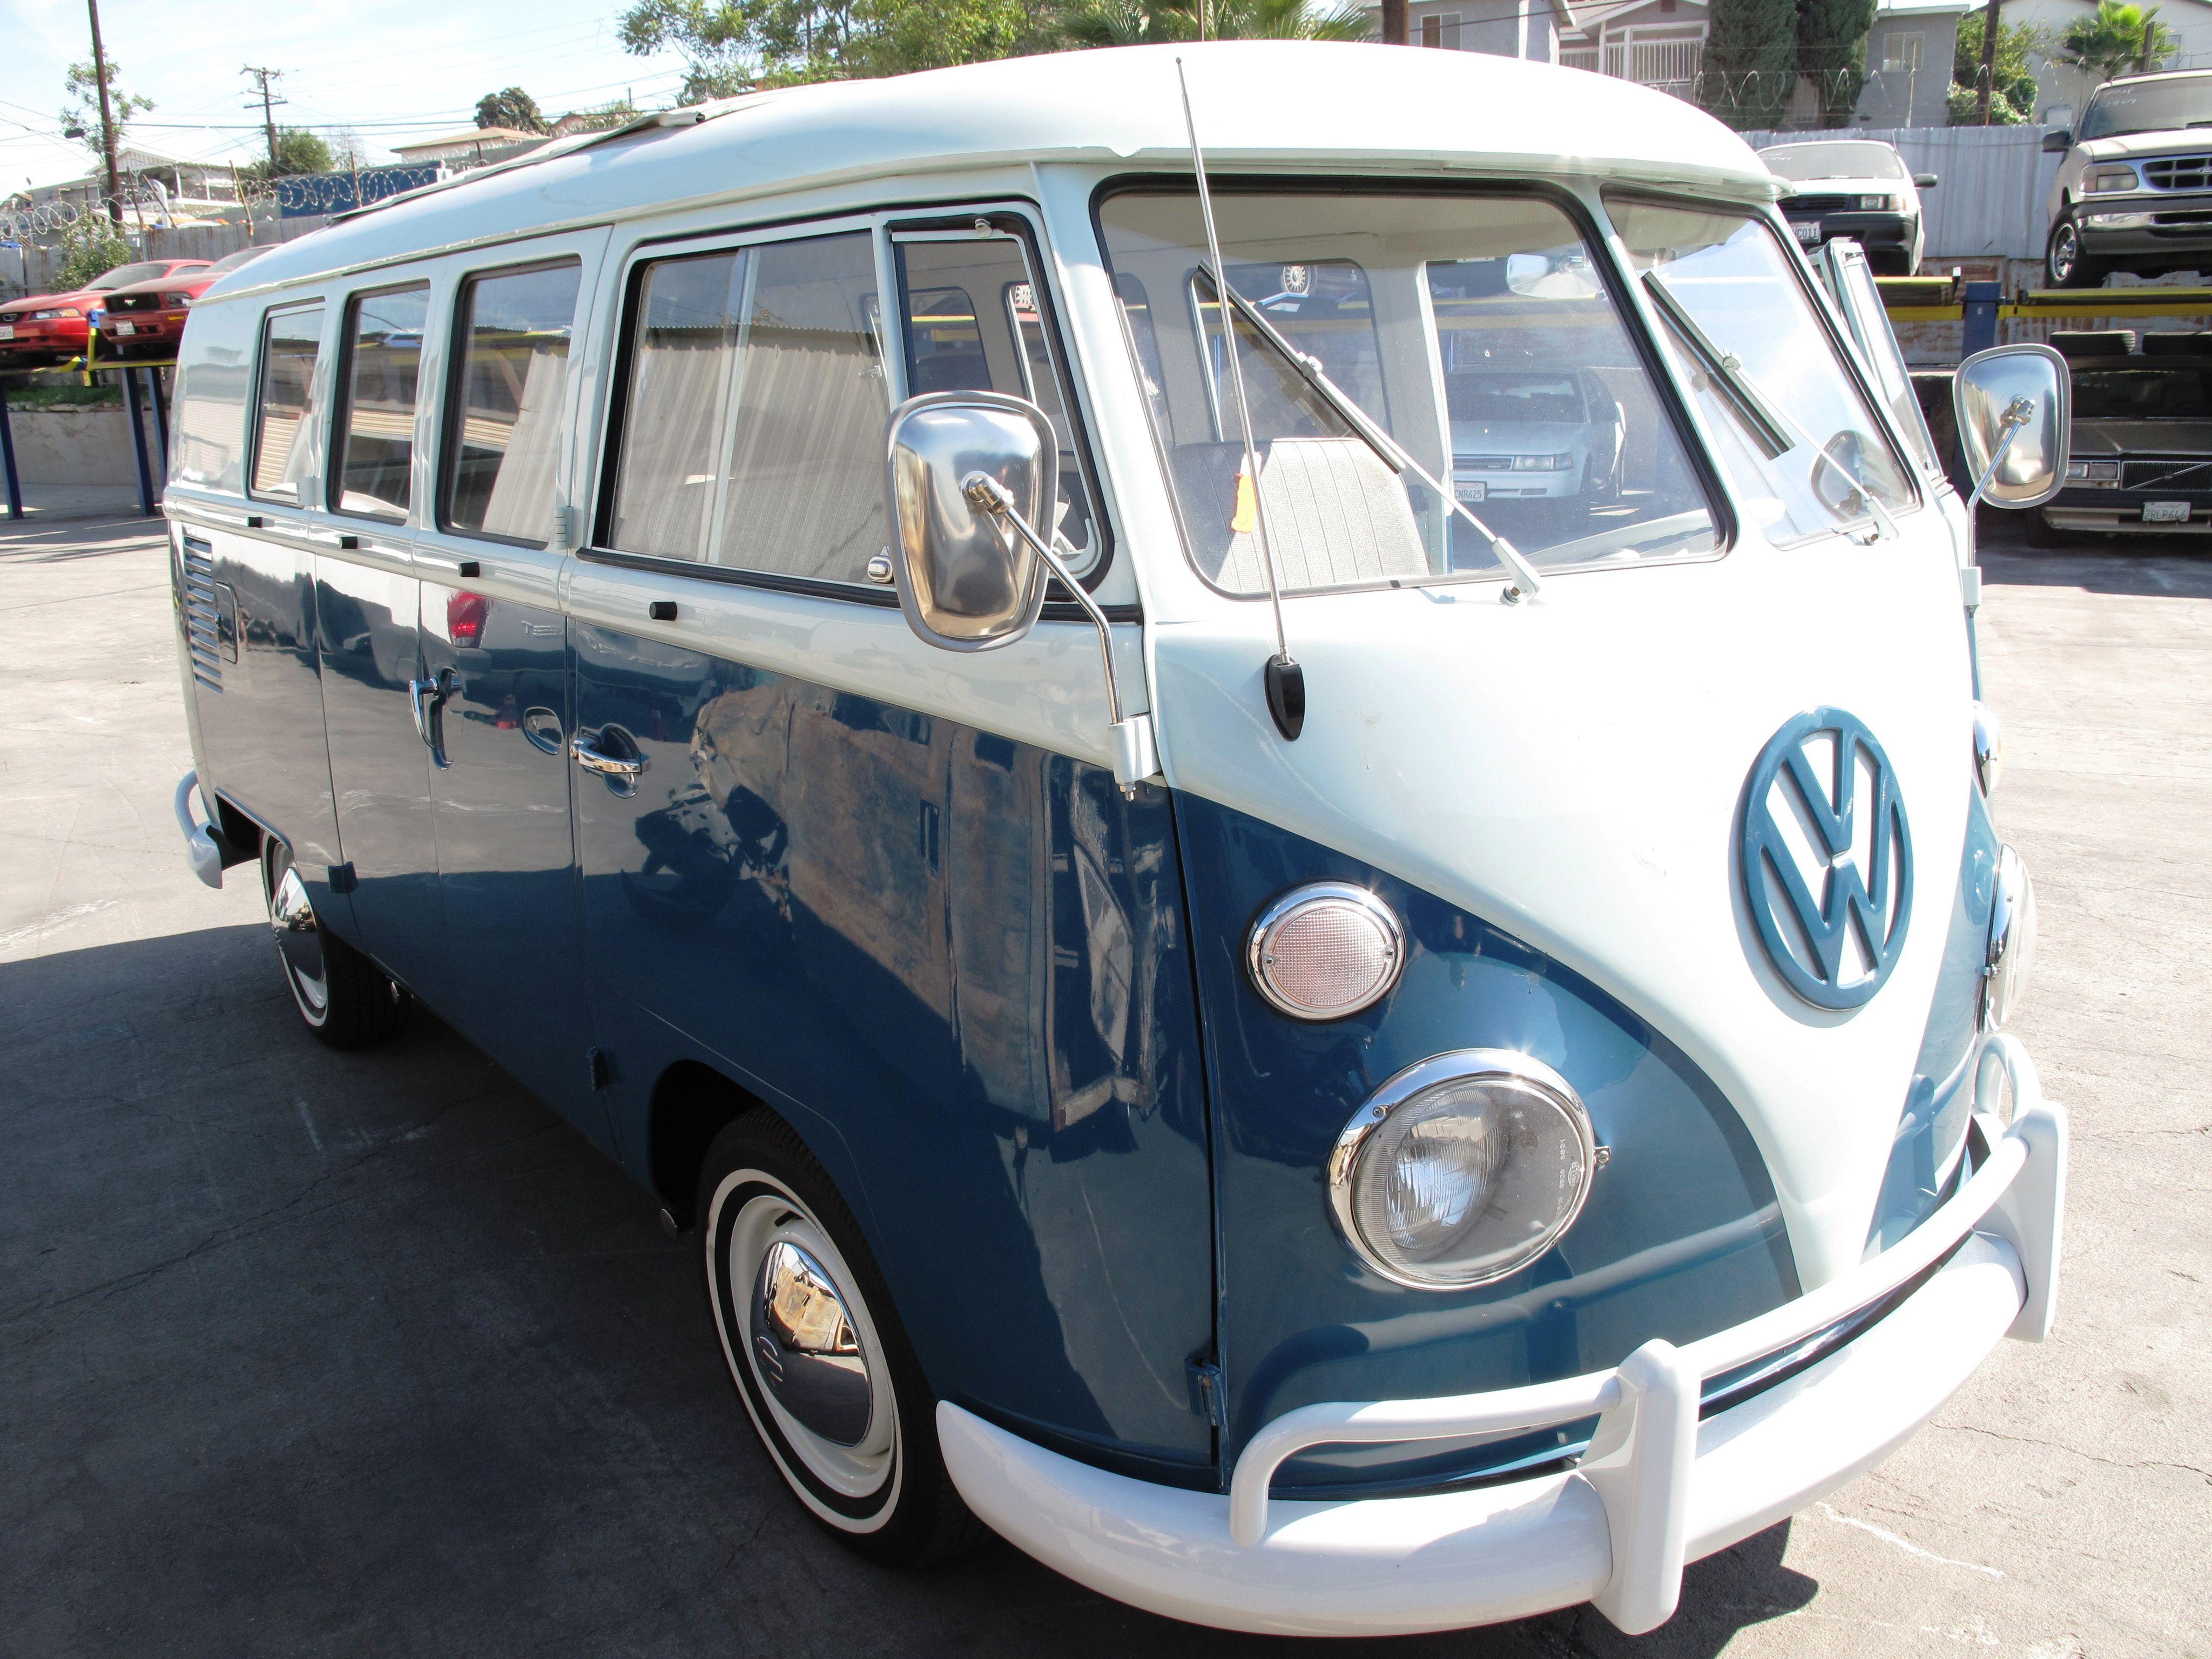 Volkswagen to end production of iconic hippie bus this year - The, van  volkswagen